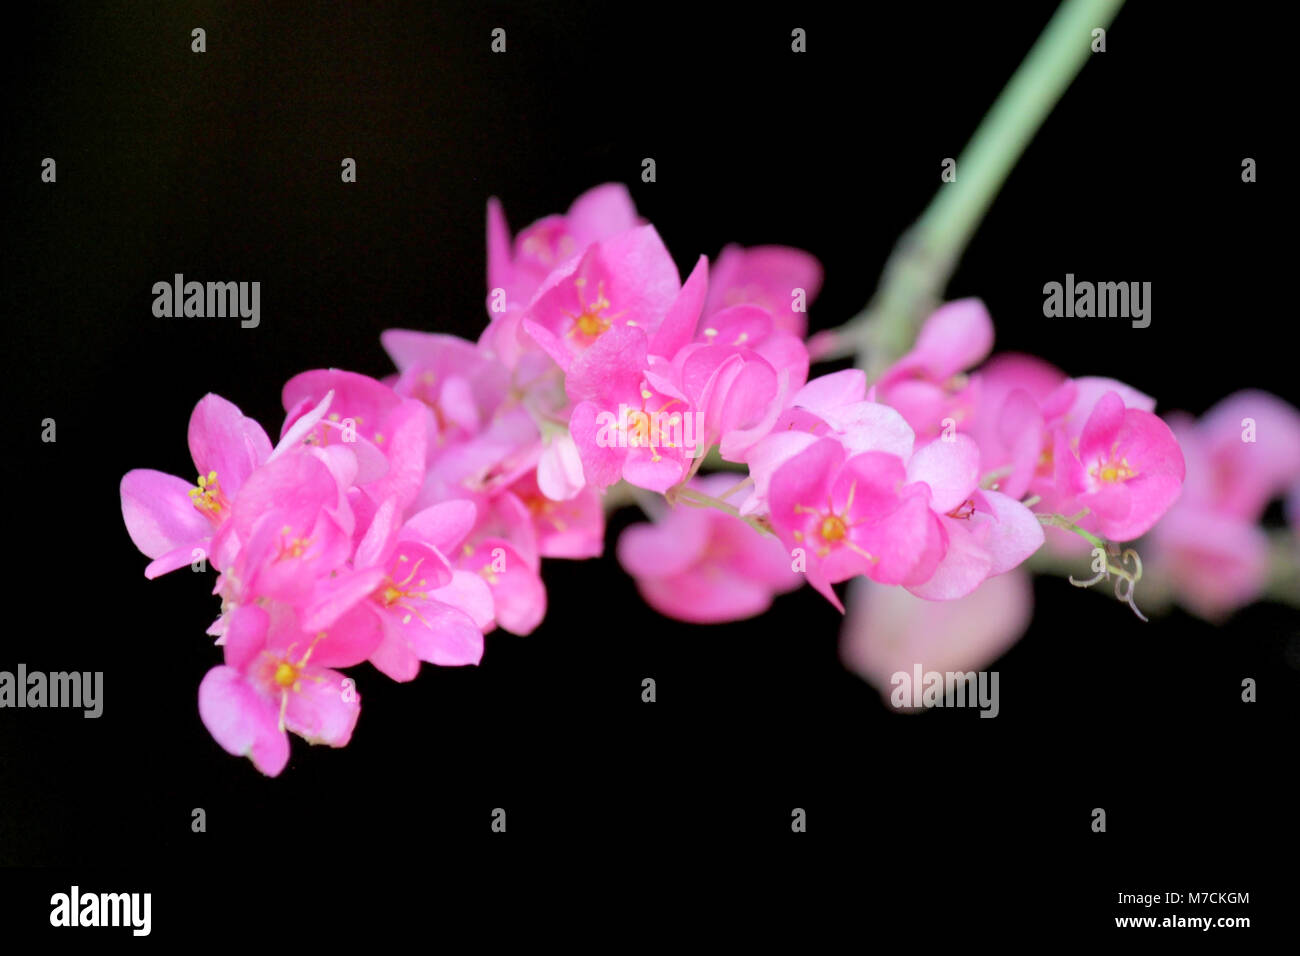 polygonaceae or coral vine, beautiful pink mexican creeper flower on black background Stock Photo